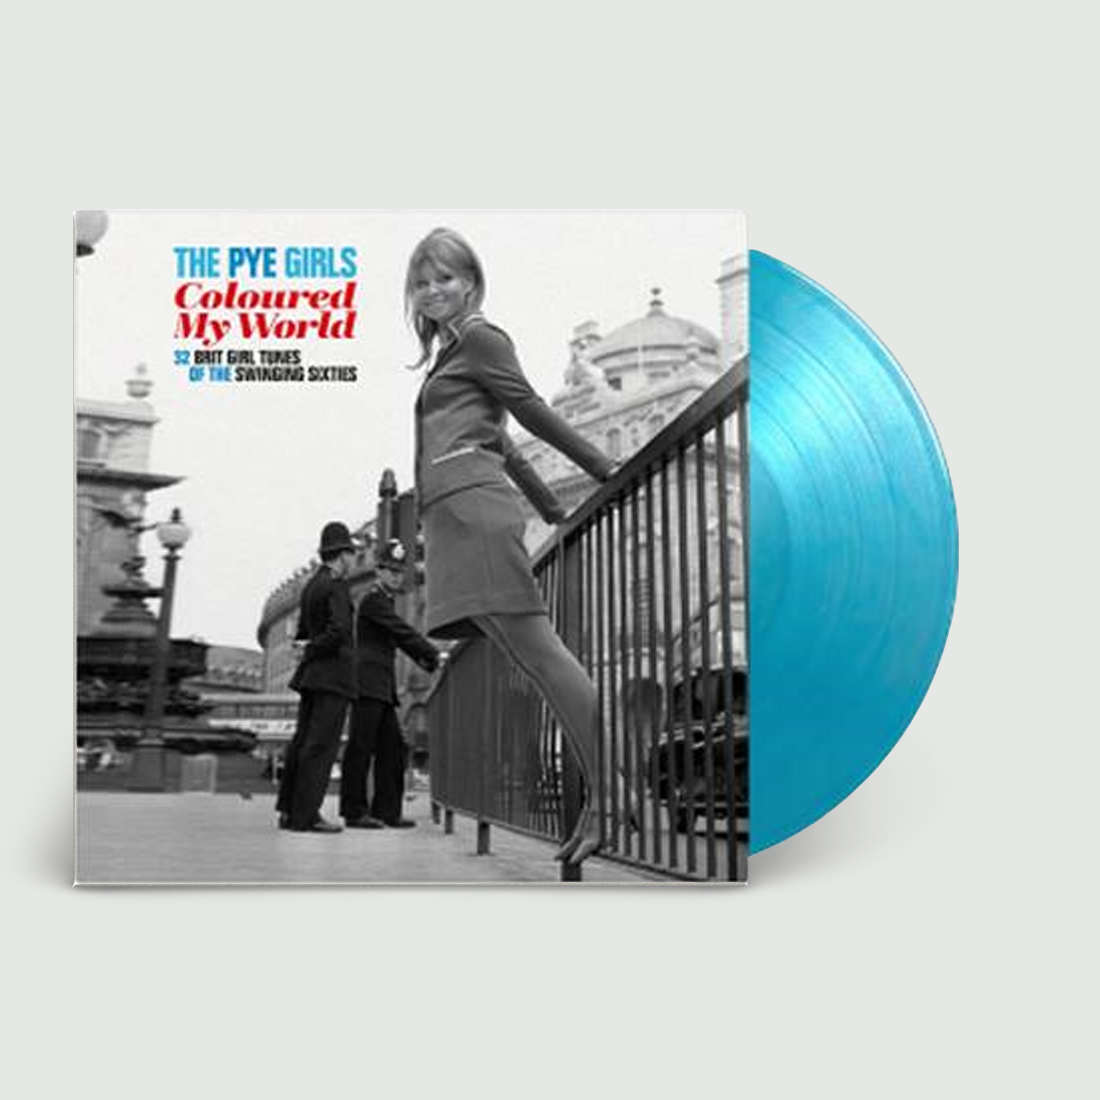 The Pye Girls My World (32 Brit Girl Tunes Of The Swinging Sixties): Limited Edition Crystal Water Vinyl 2LP